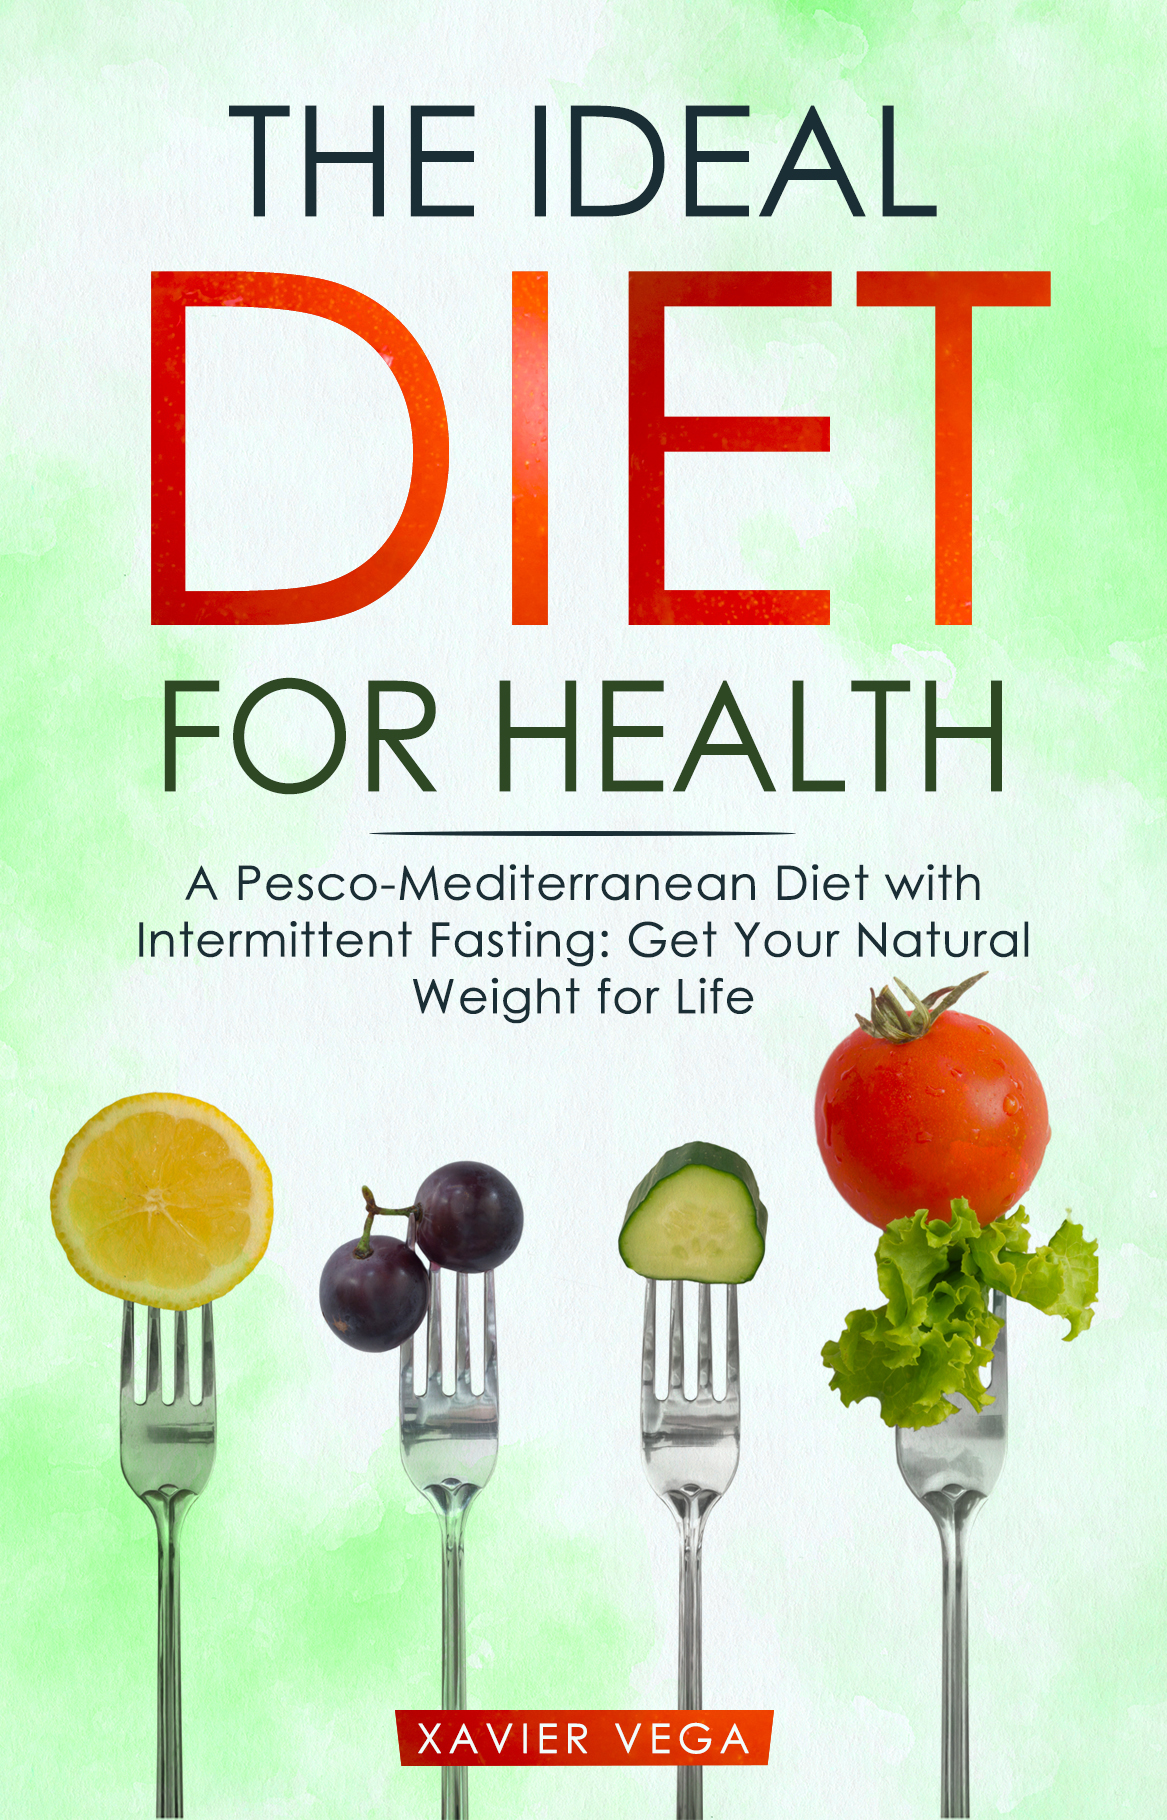 FREE: The Ideal Diet for Health A Pesco-Mediterranean Diet with Intermittent Fasting: Get Your Natural Weight for Life by Xavier Vega